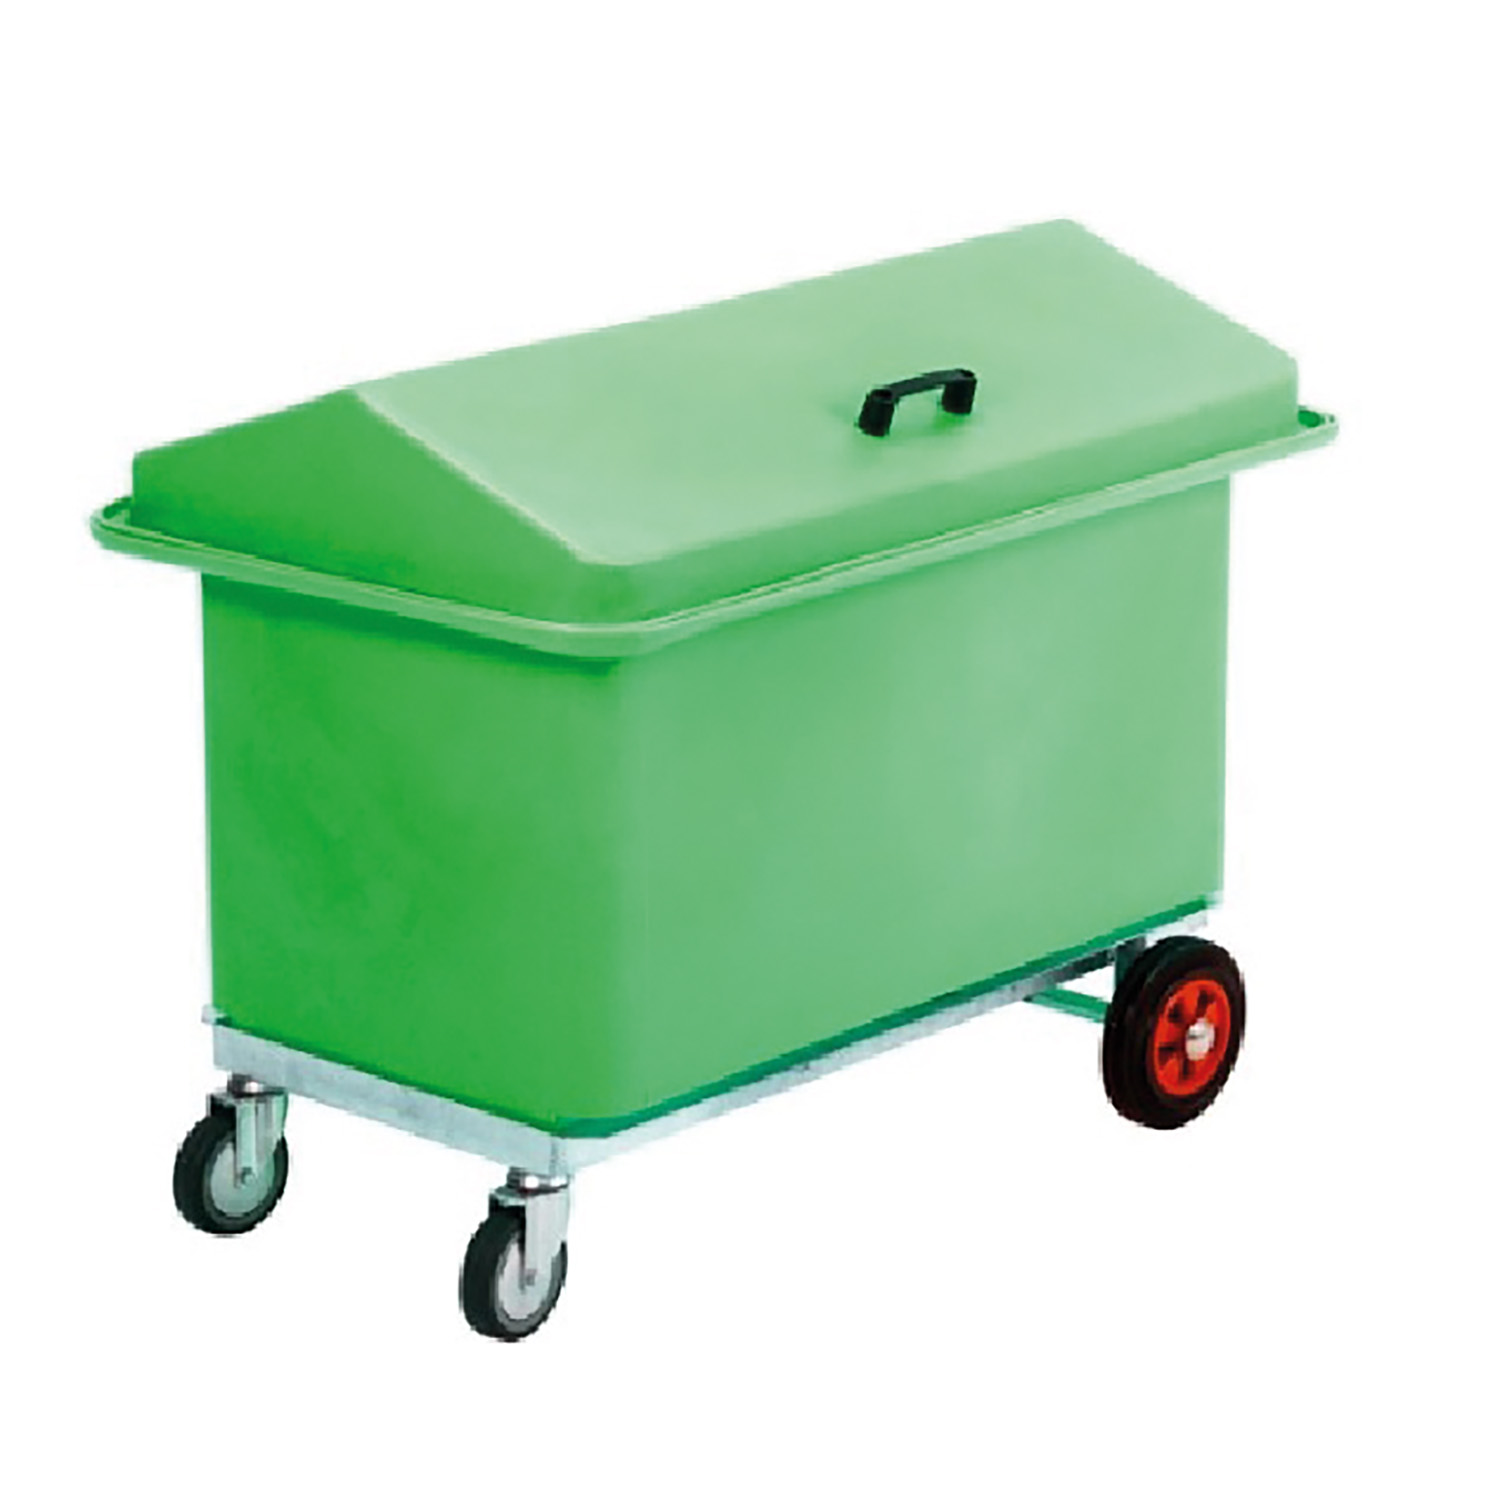 STUBBS MOBILE CHEST TWO COMPARTMENTS S58425 GREEN TWO COMPARTMENT MOBILE